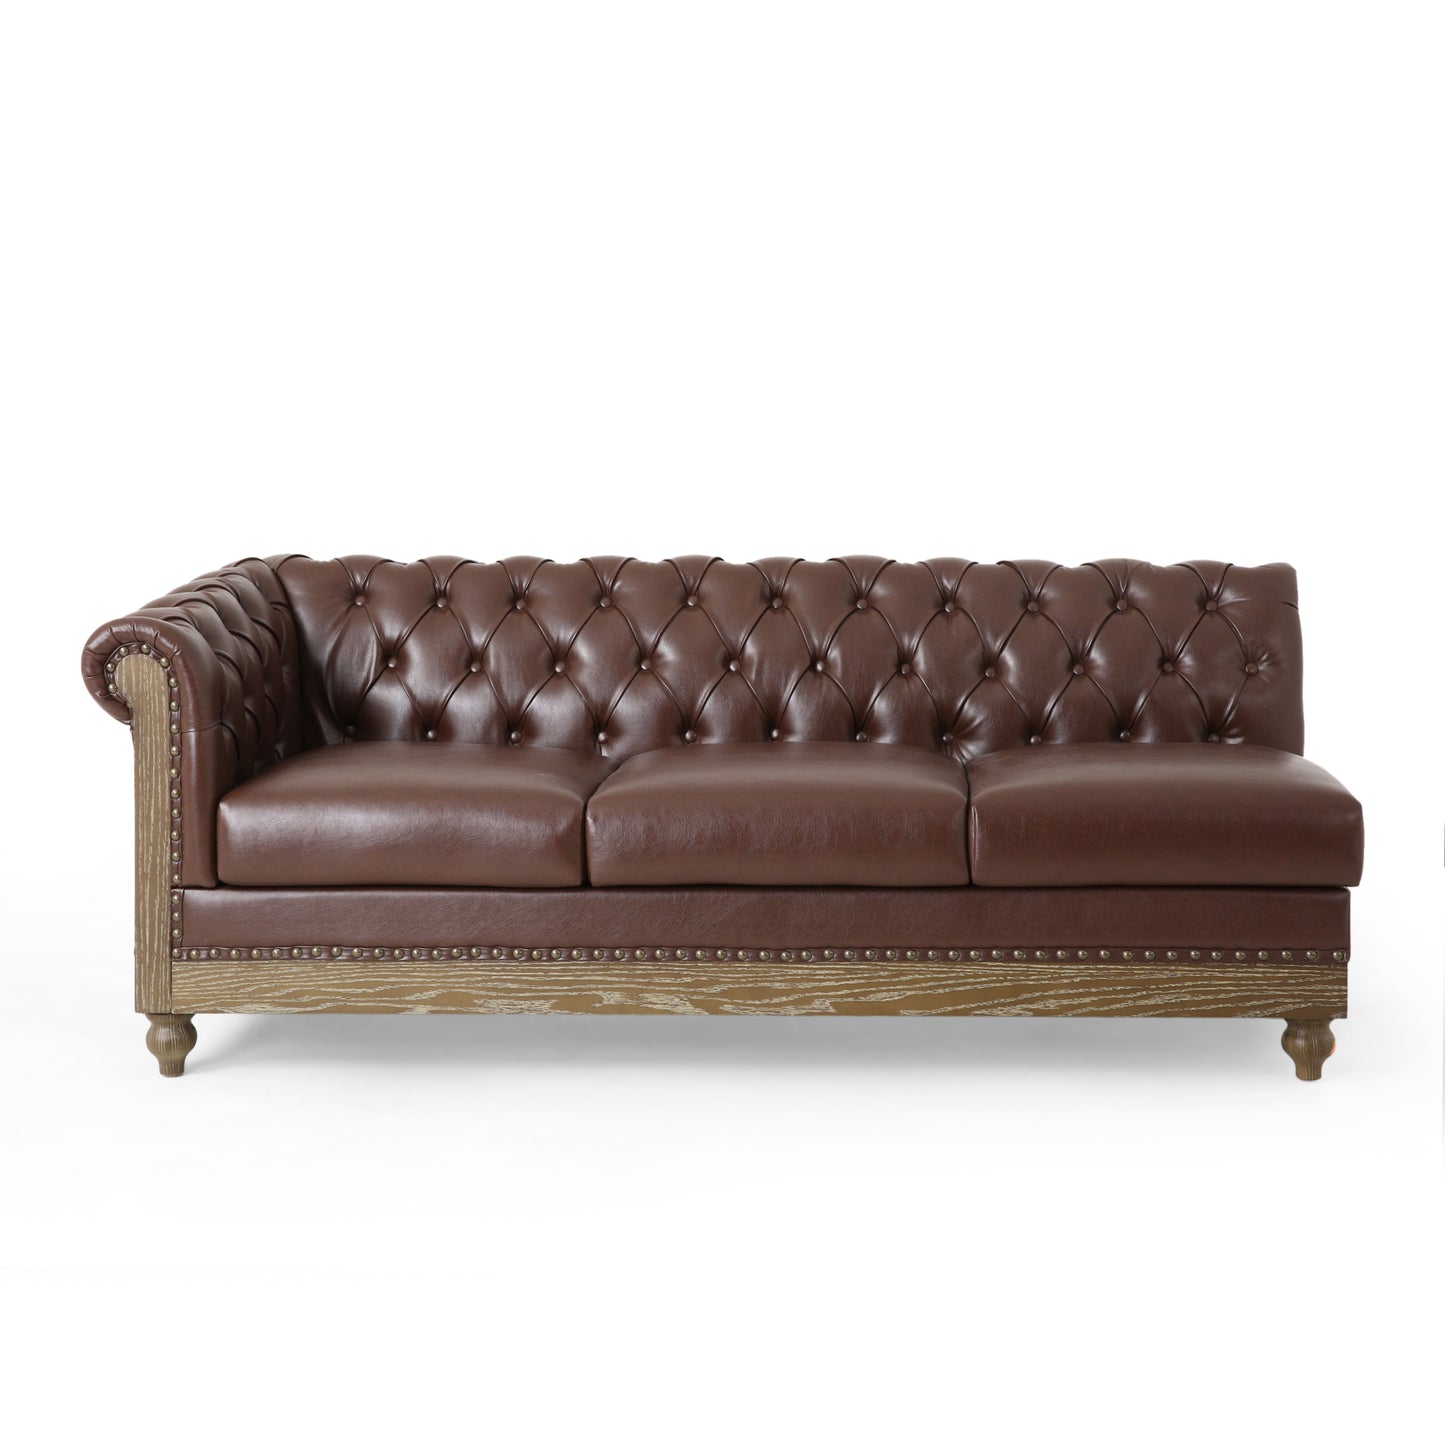 Kinzie Chesterfield Tufted 7 Seater Sectional Sofa with Nailhead Trim